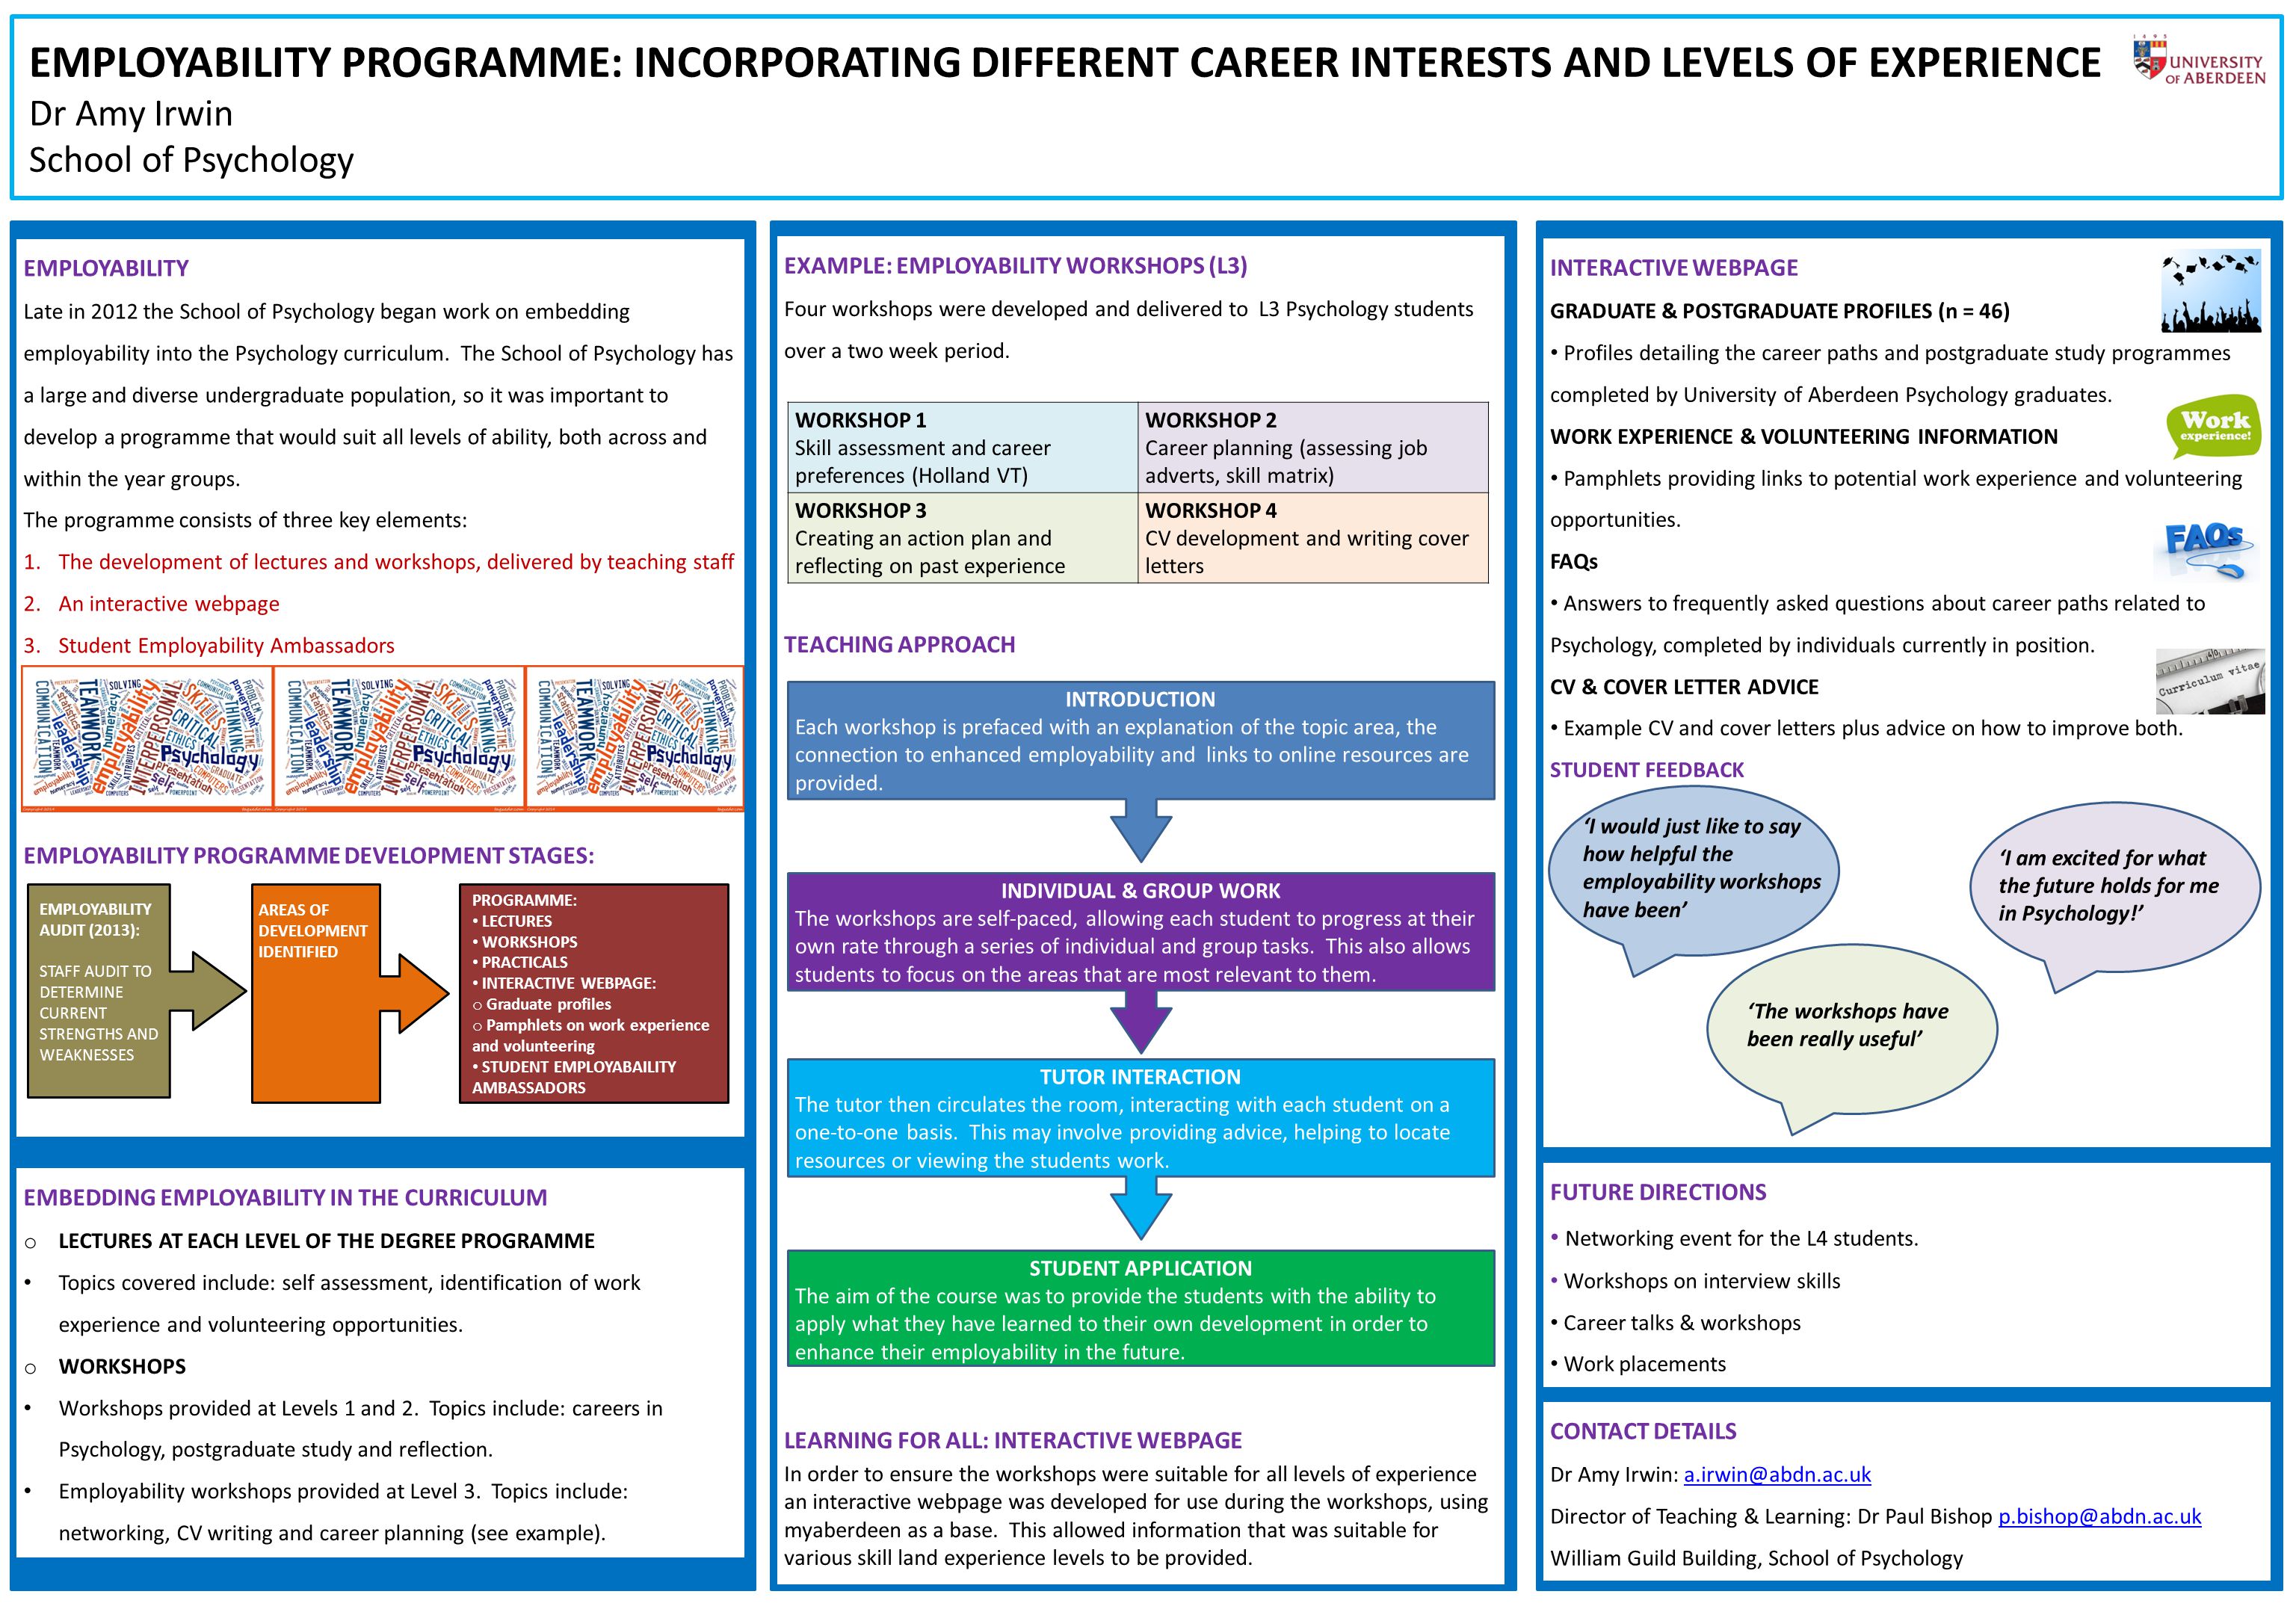 EMPLOYABILITY PROGRAMME: INCORPORATING DIFFERENT CAREER INTERESTS AND LEVELS OF EXPERIENCE Dr Amy Irwin School of Psychology EMPLOYABILITY Late in 2012 the School of Psychology began work on embedding employability into the Psychology curriculum.